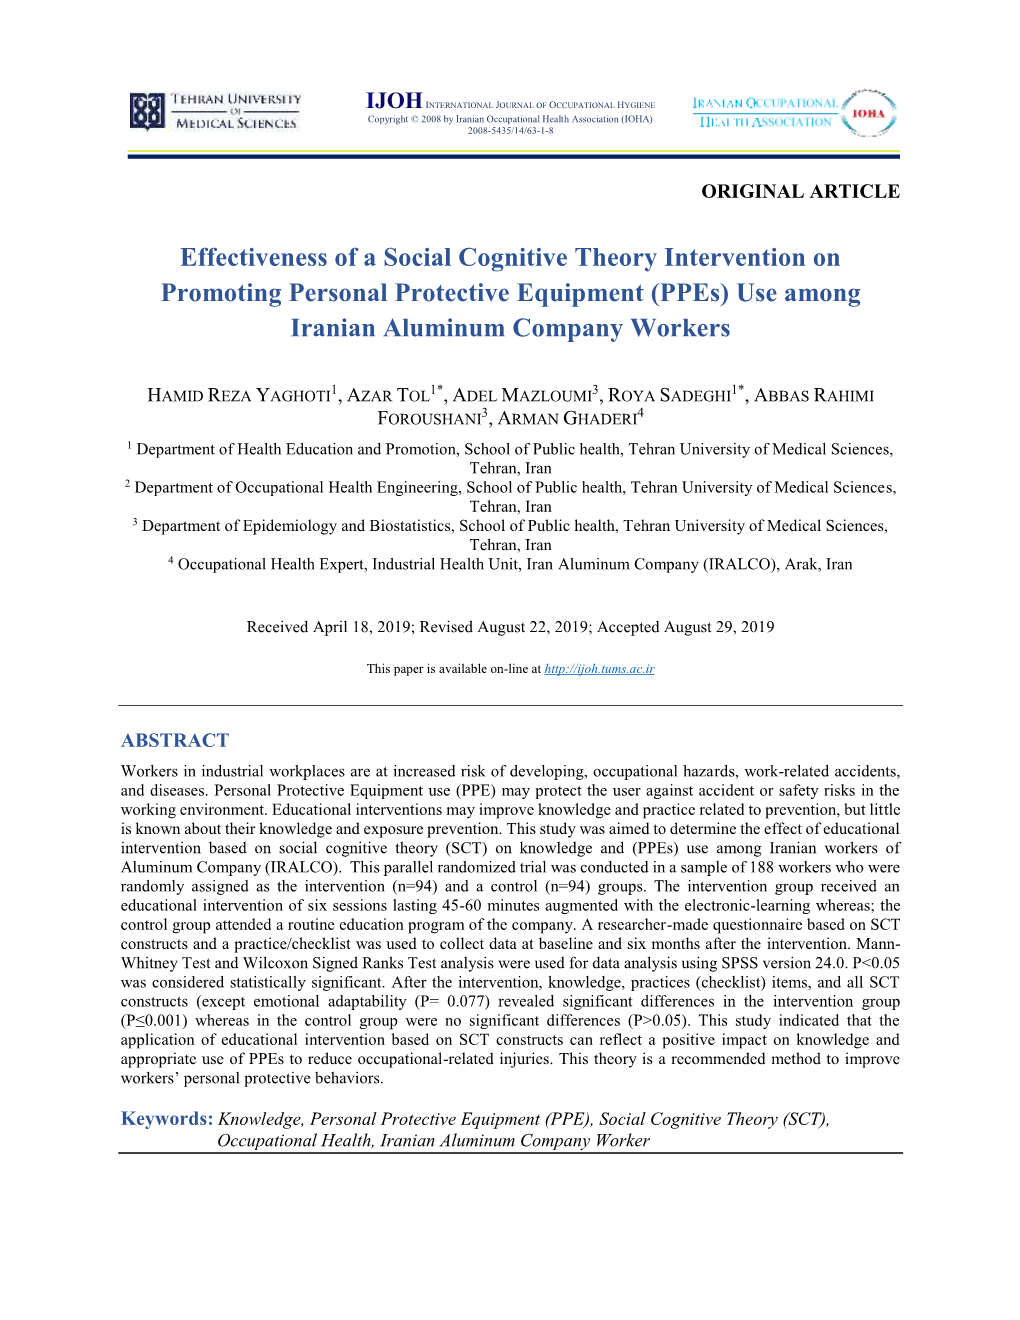 Effectiveness of a Social Cognitive Theory Intervention on Promoting Personal Protective Equipment (Ppes) Use Among Iranian Aluminum Company Workers